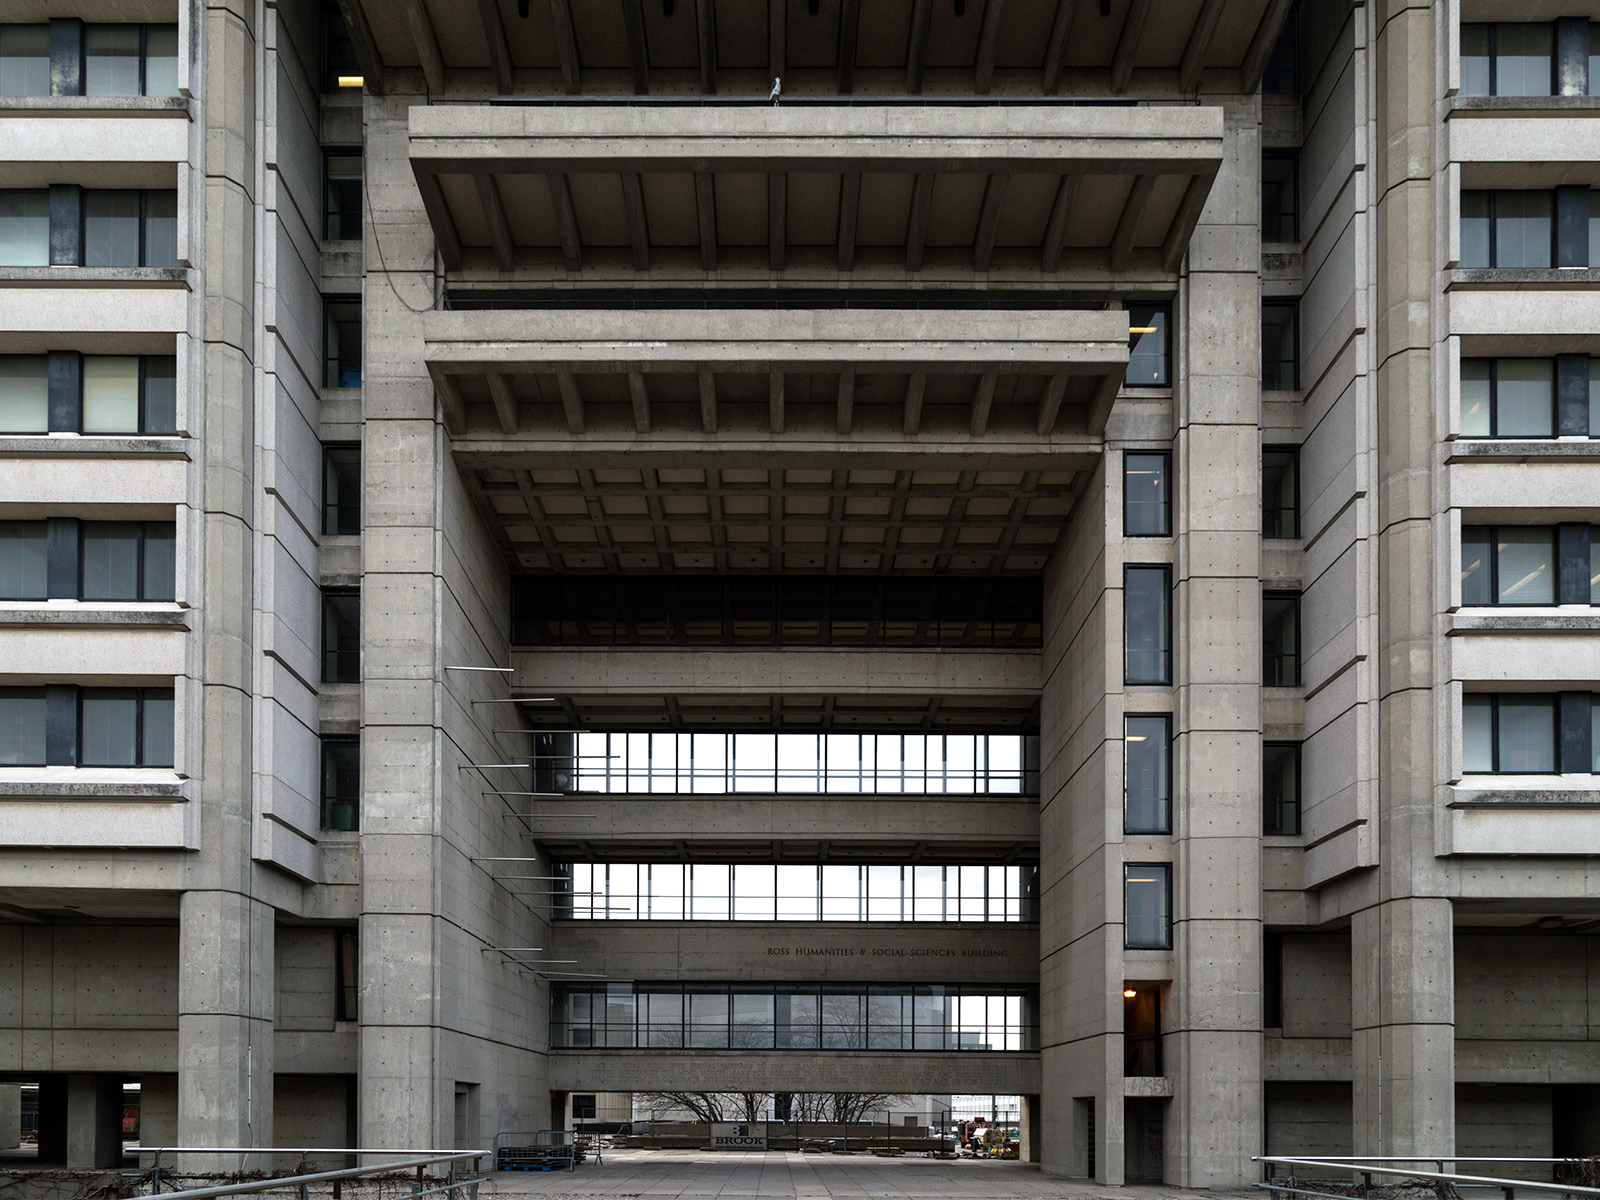 20141207. The main entrance colossal and classic brutalist Ross